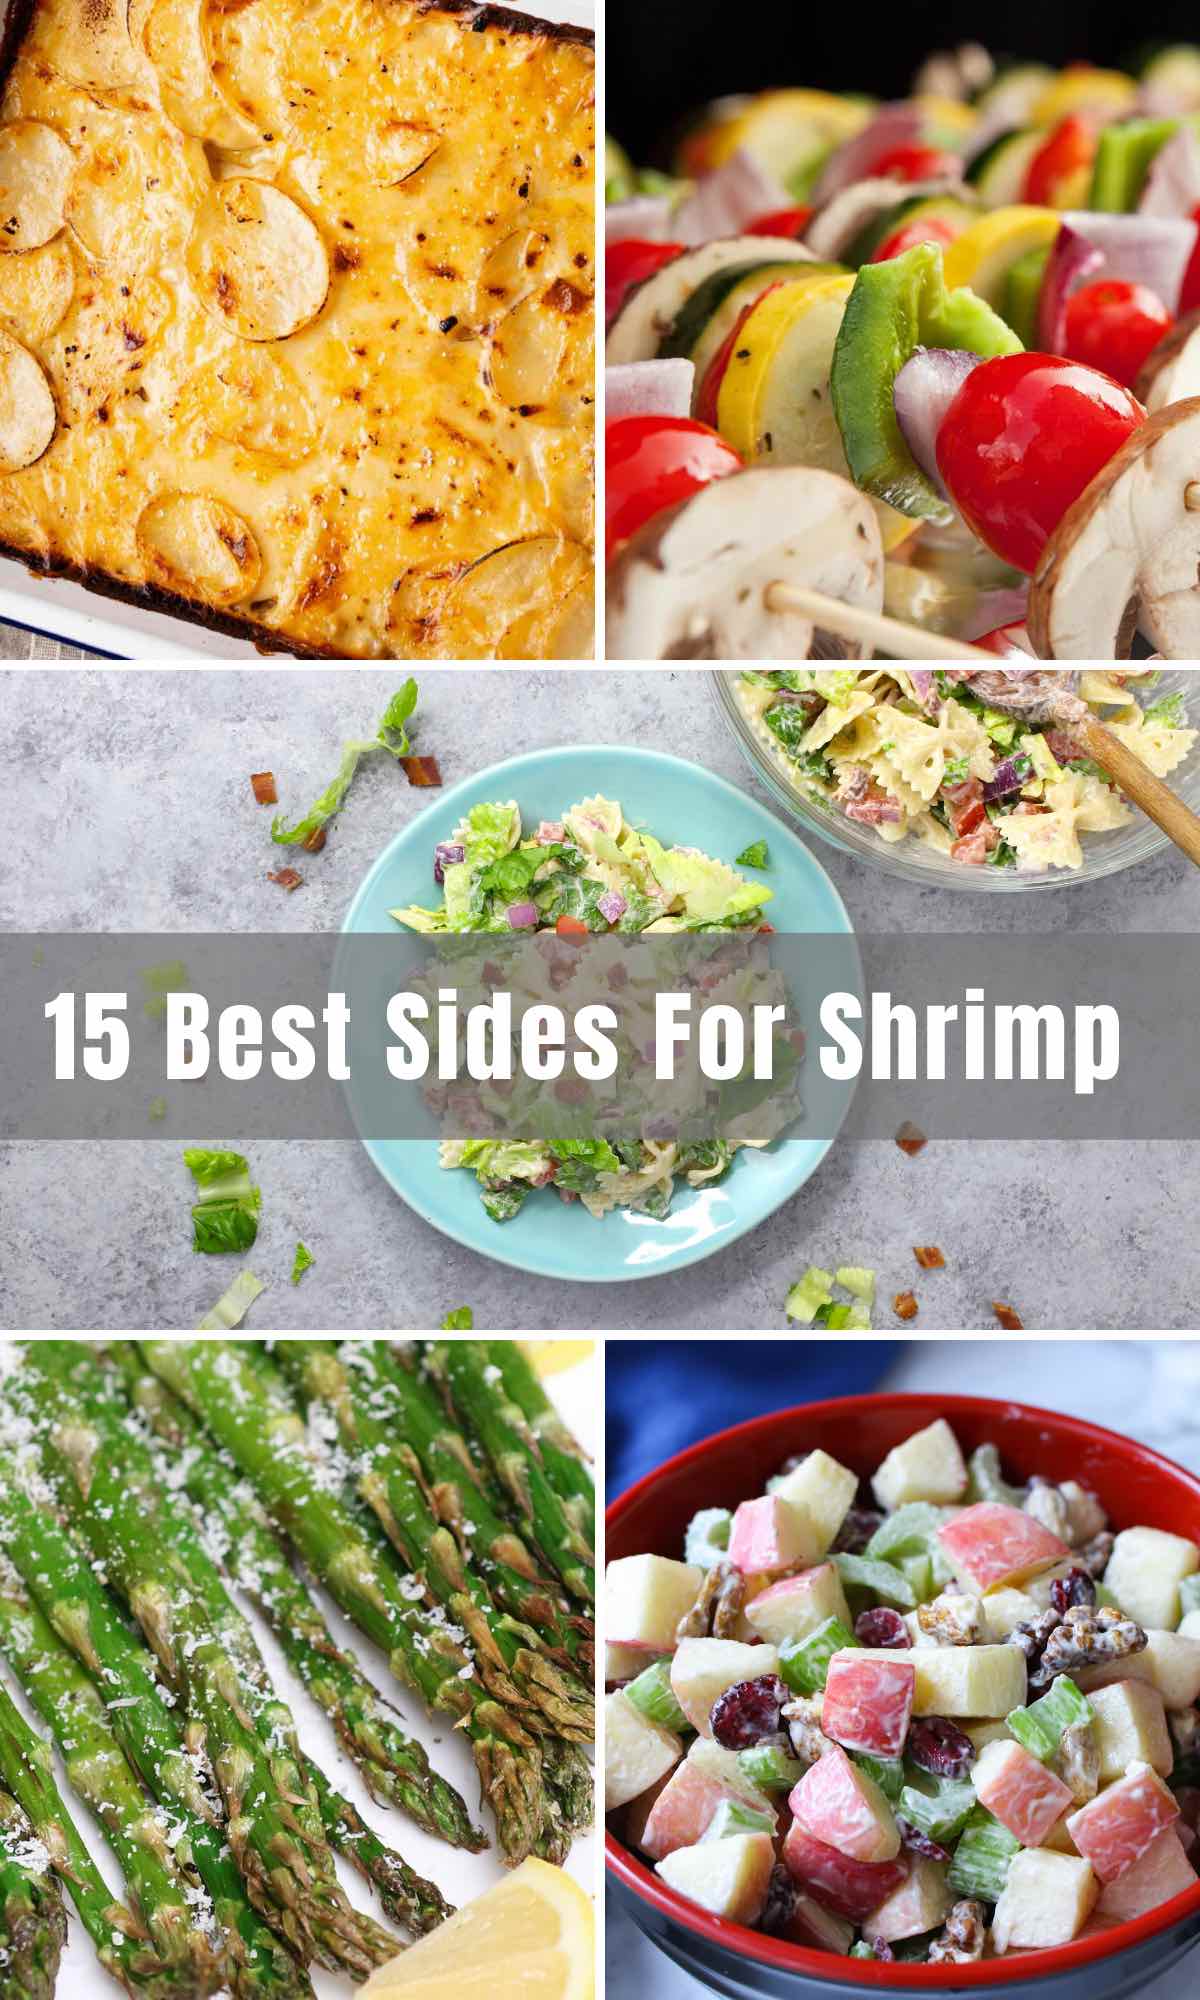 Looking for side dishes to serve with shrimp? We’ve collected some quick and easy side dishes for shrimp, from veggies, salad, to potatoes, rice, and more. Whether you’re having BBQ shrimp, boiled shrimp, or grilled shrimp, I’m sure you’ll find something you like from this list. 